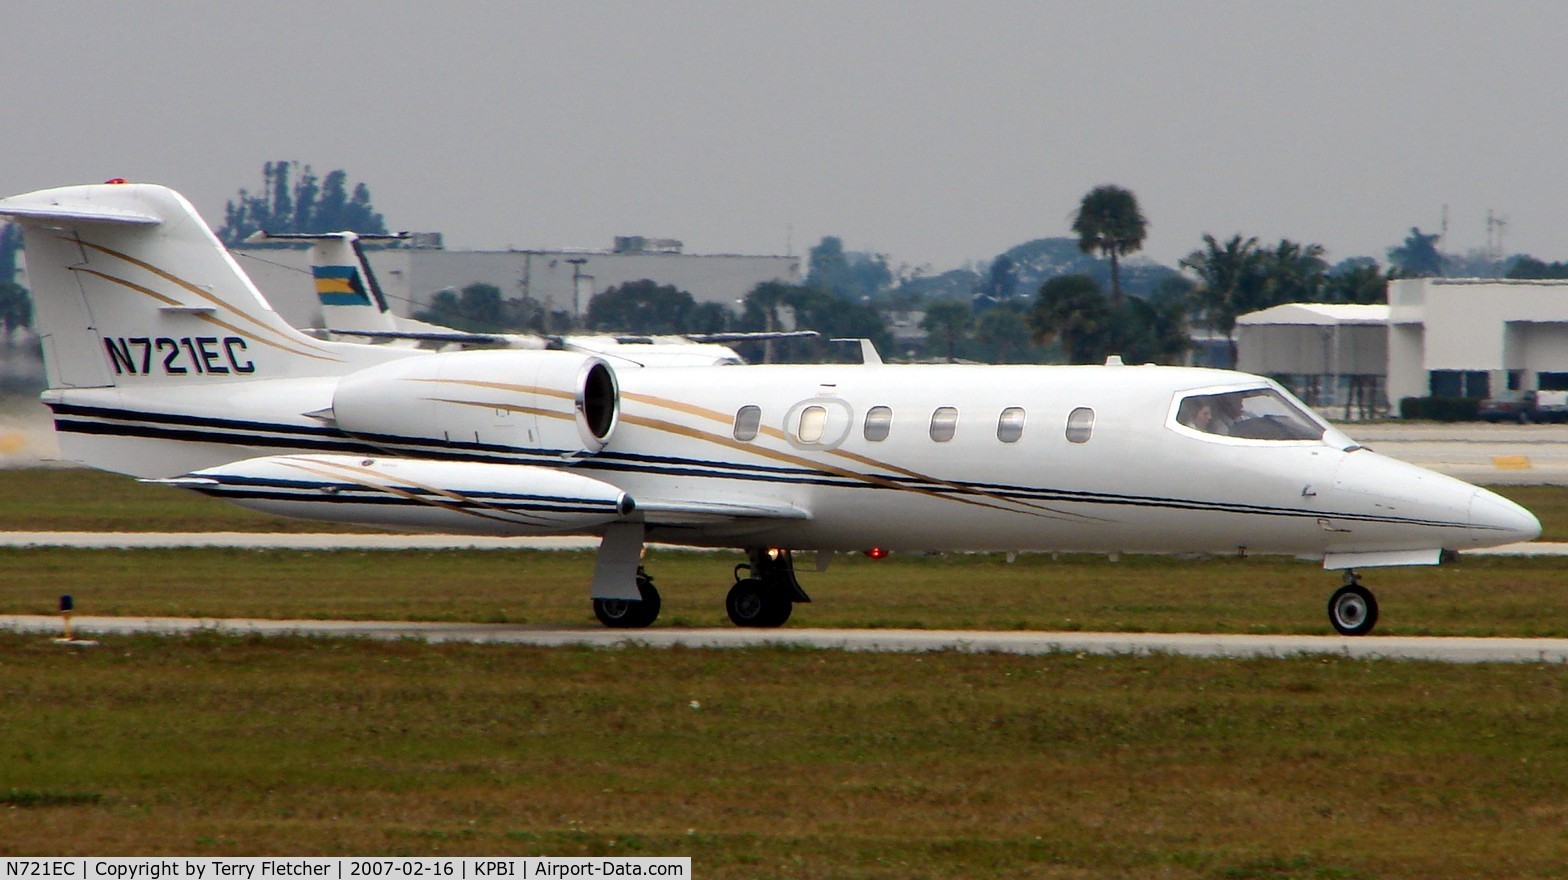 N721EC, 1980 Learjet Inc 35A C/N 355, part of the Friday afternoon arrivals 'rush' at PBI